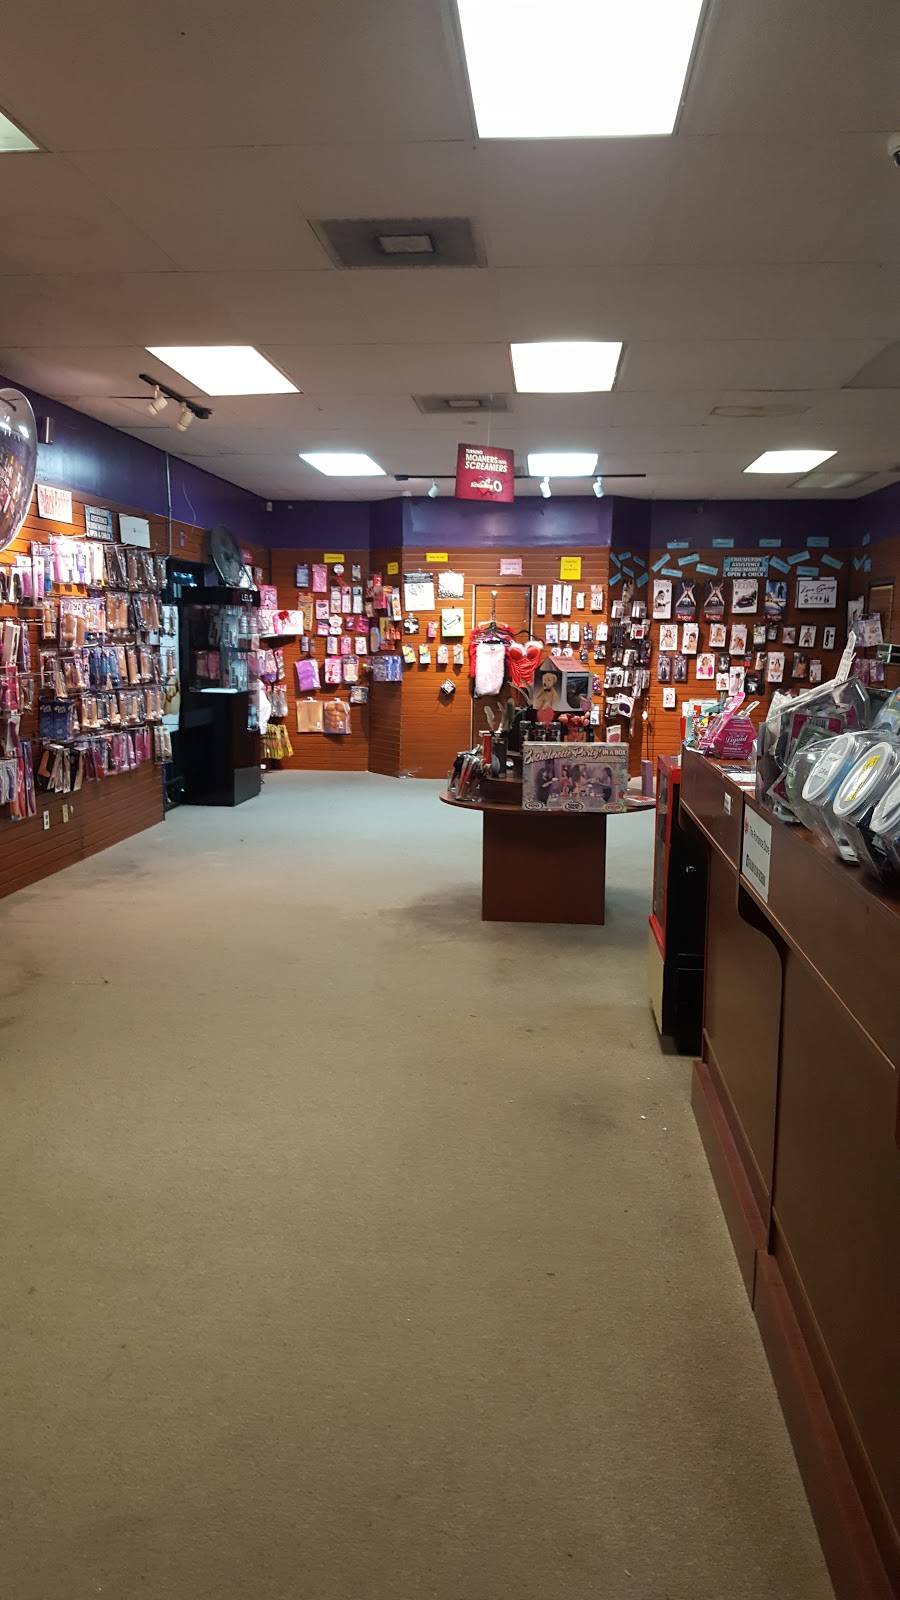 romance store | 6900 South Fwy # A2, Fort Worth, TX 76134, USA | Phone: (817) 551-3770